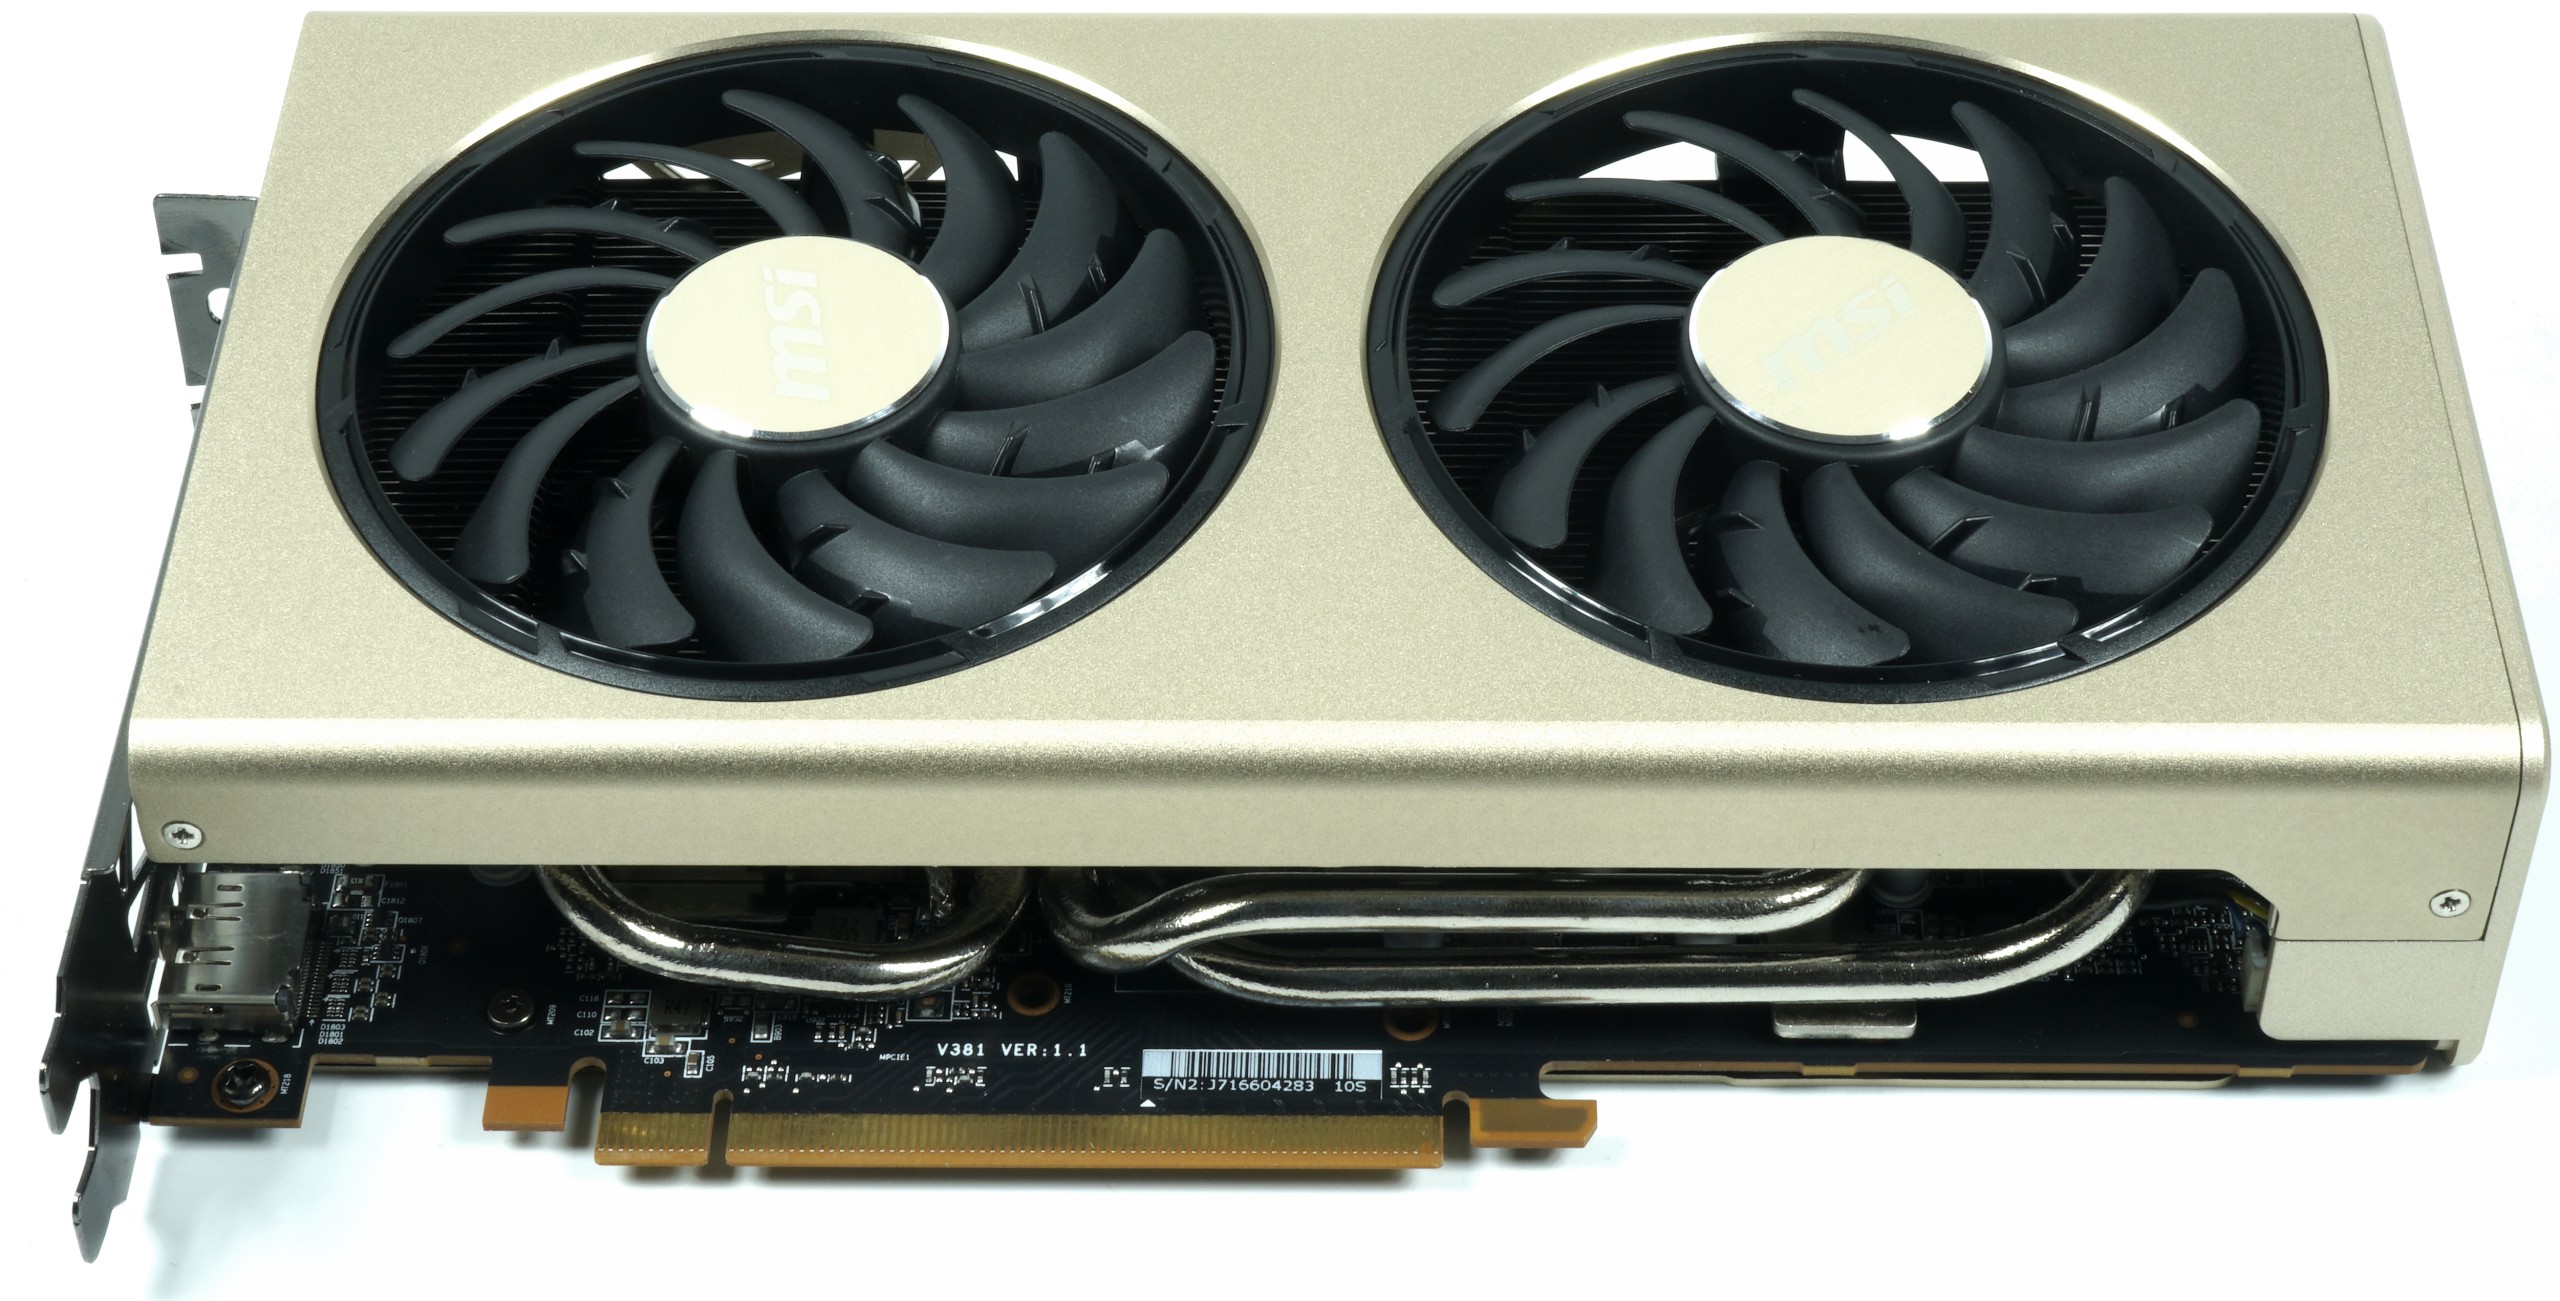 MSI Radeon RX 5700 XT Evoke OC Edition tested – butter or 